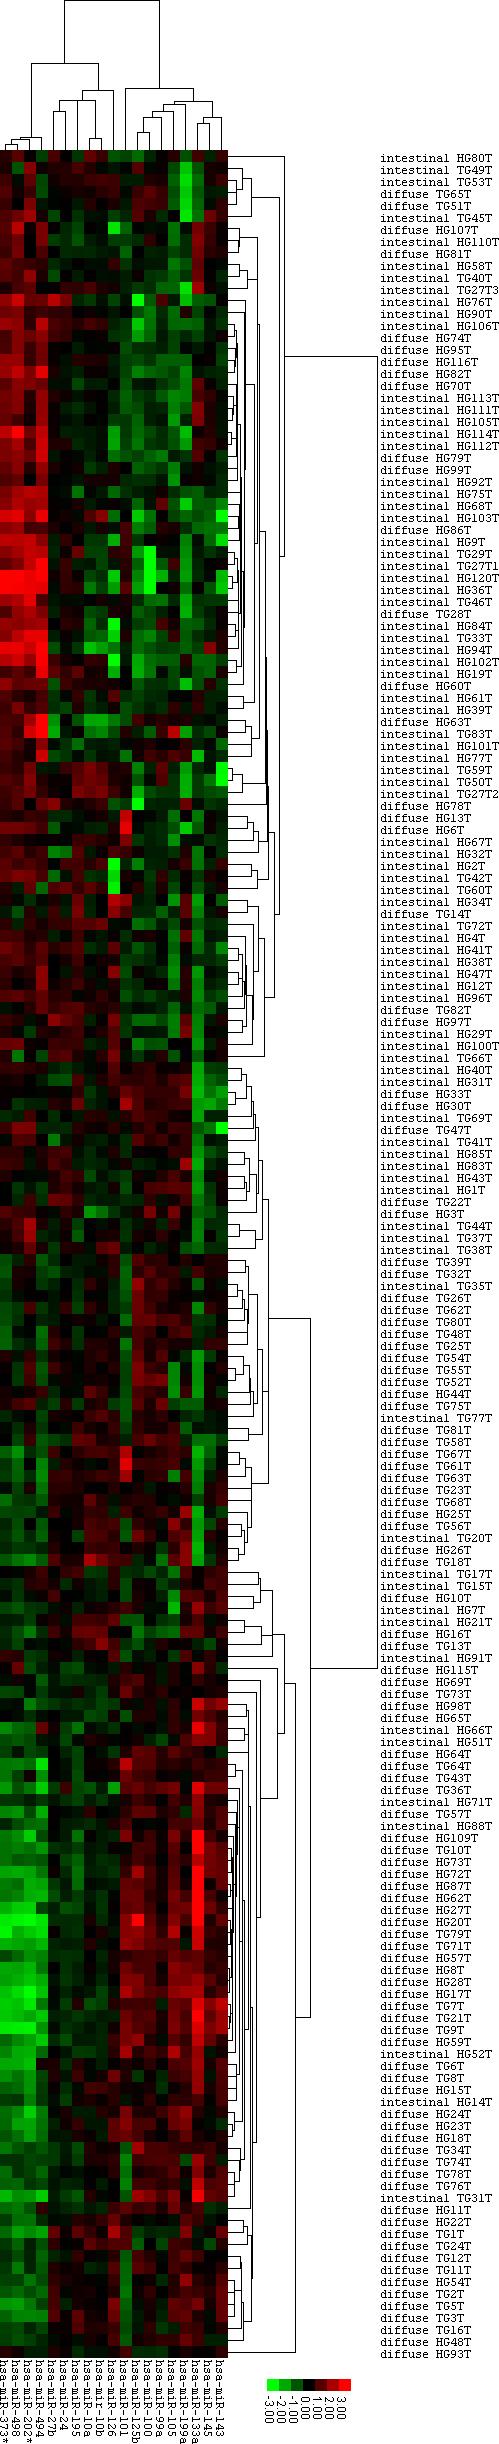 Ueda et al webappendix 6 Webfigure 3: Average linkage clustering with centered Pearson correlation using 103 diffuse-type gastric cancers and 81 intestinal-type gastric cancers (184 gastric cancers)